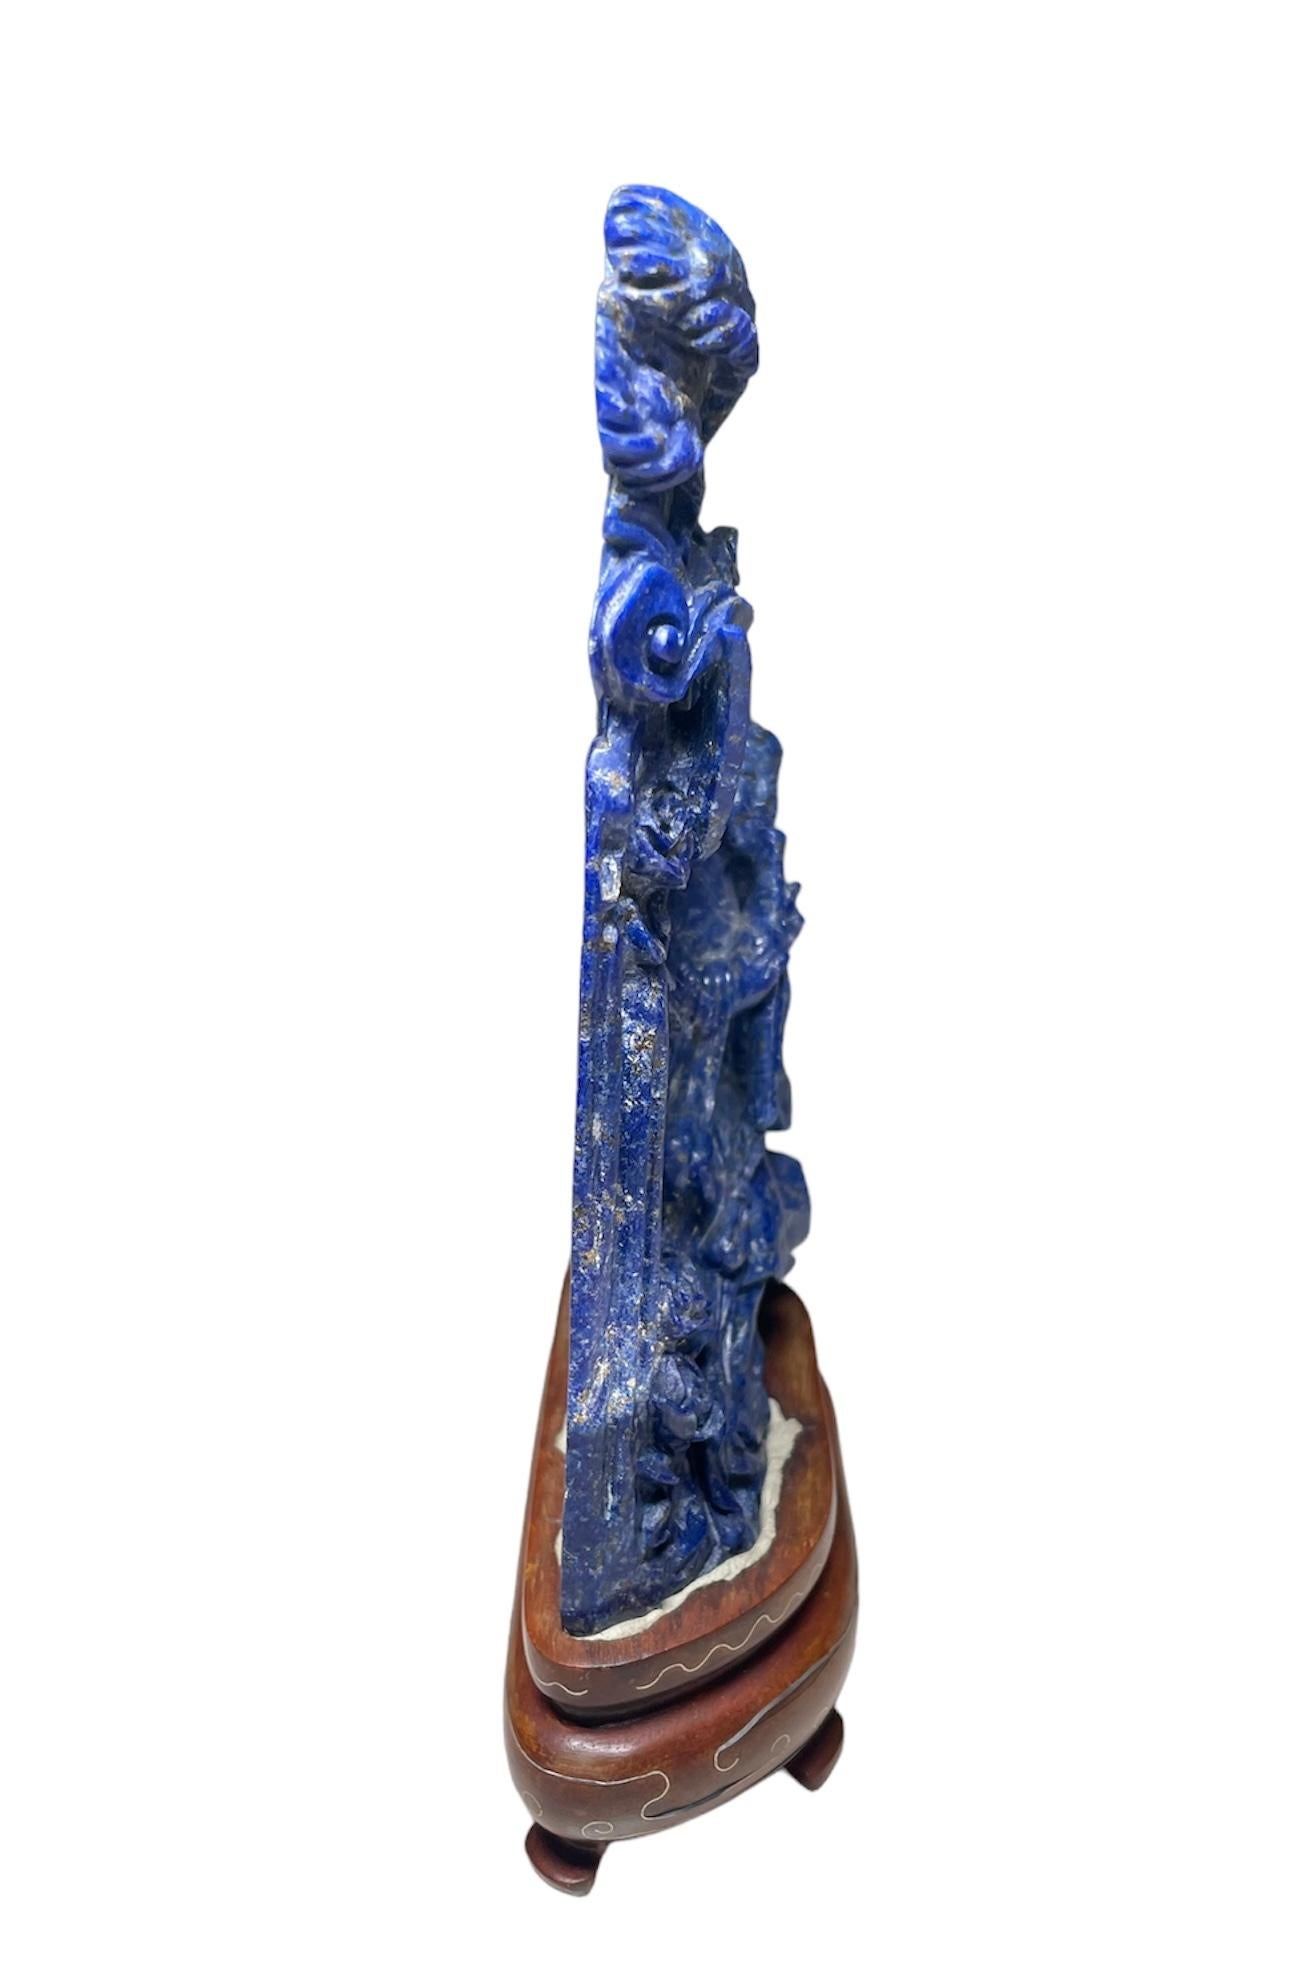 This is a hand carved small Chinese Lapis lazuli sculptures of the Guan Yin and the Phoenix bird over a wood trunk. Both sculptures are supported by a carved wood oval base.